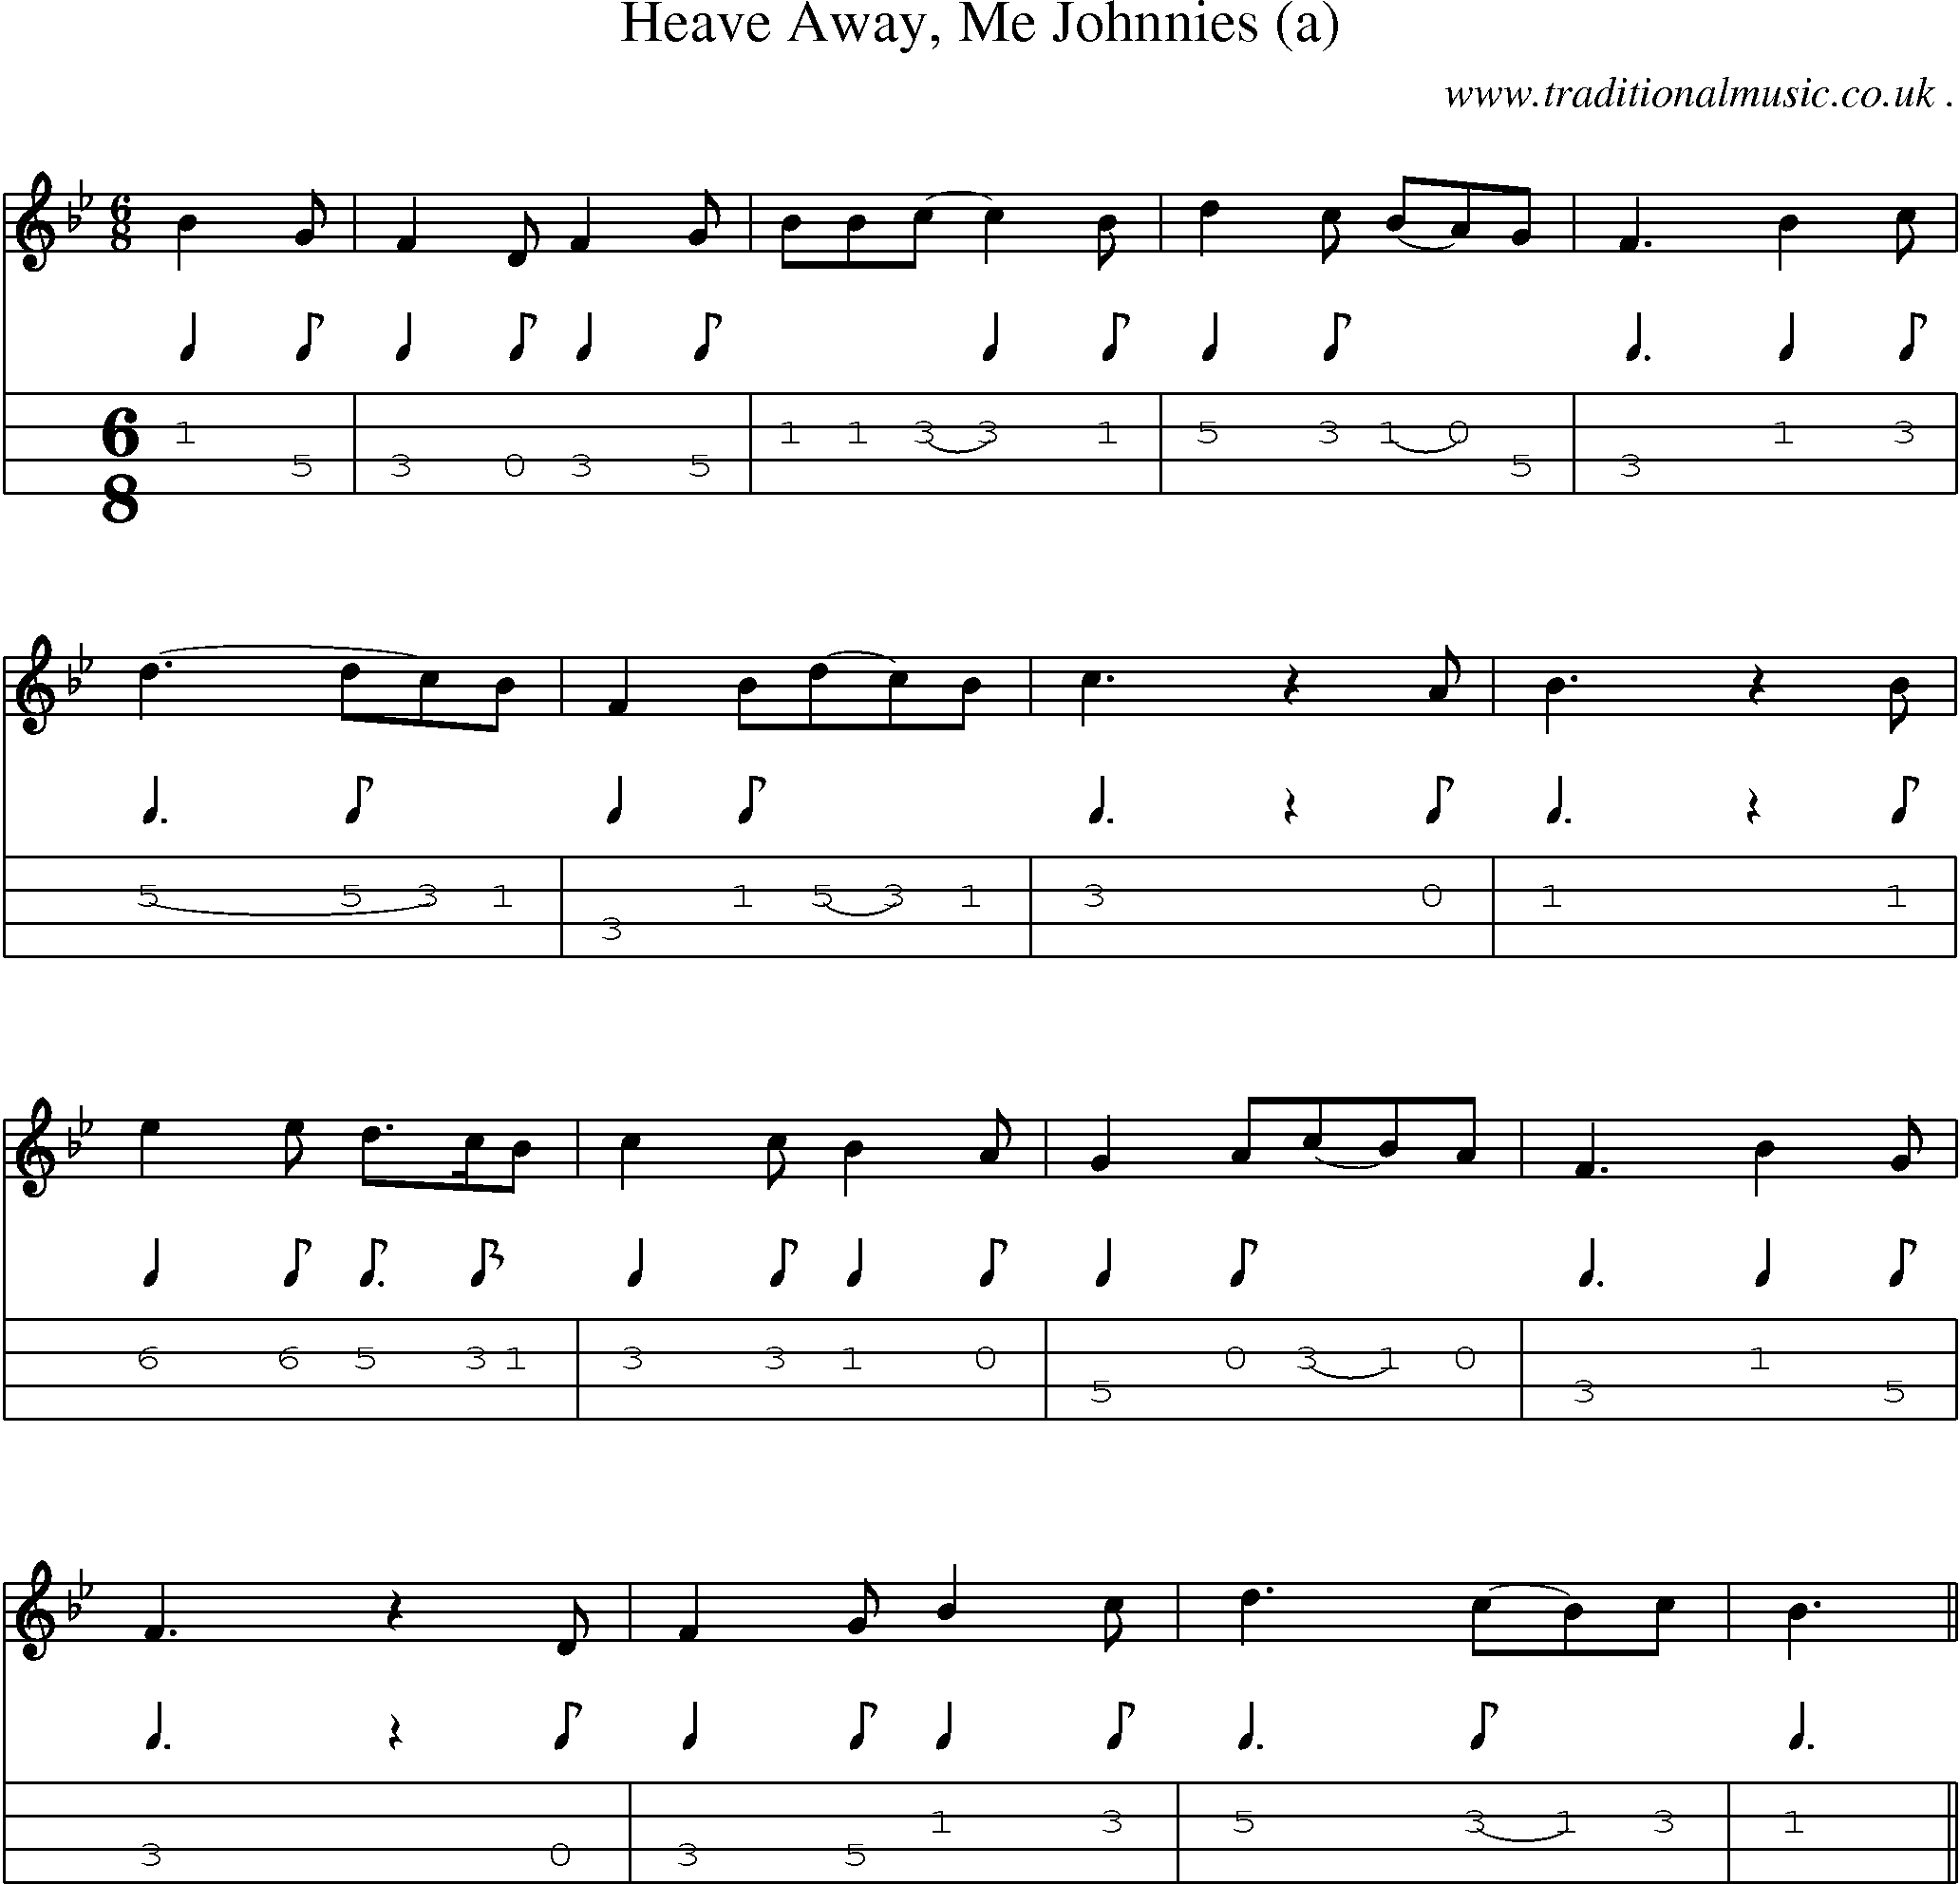 Sheet-Music and Mandolin Tabs for Heave Away Me Johnnies (a)